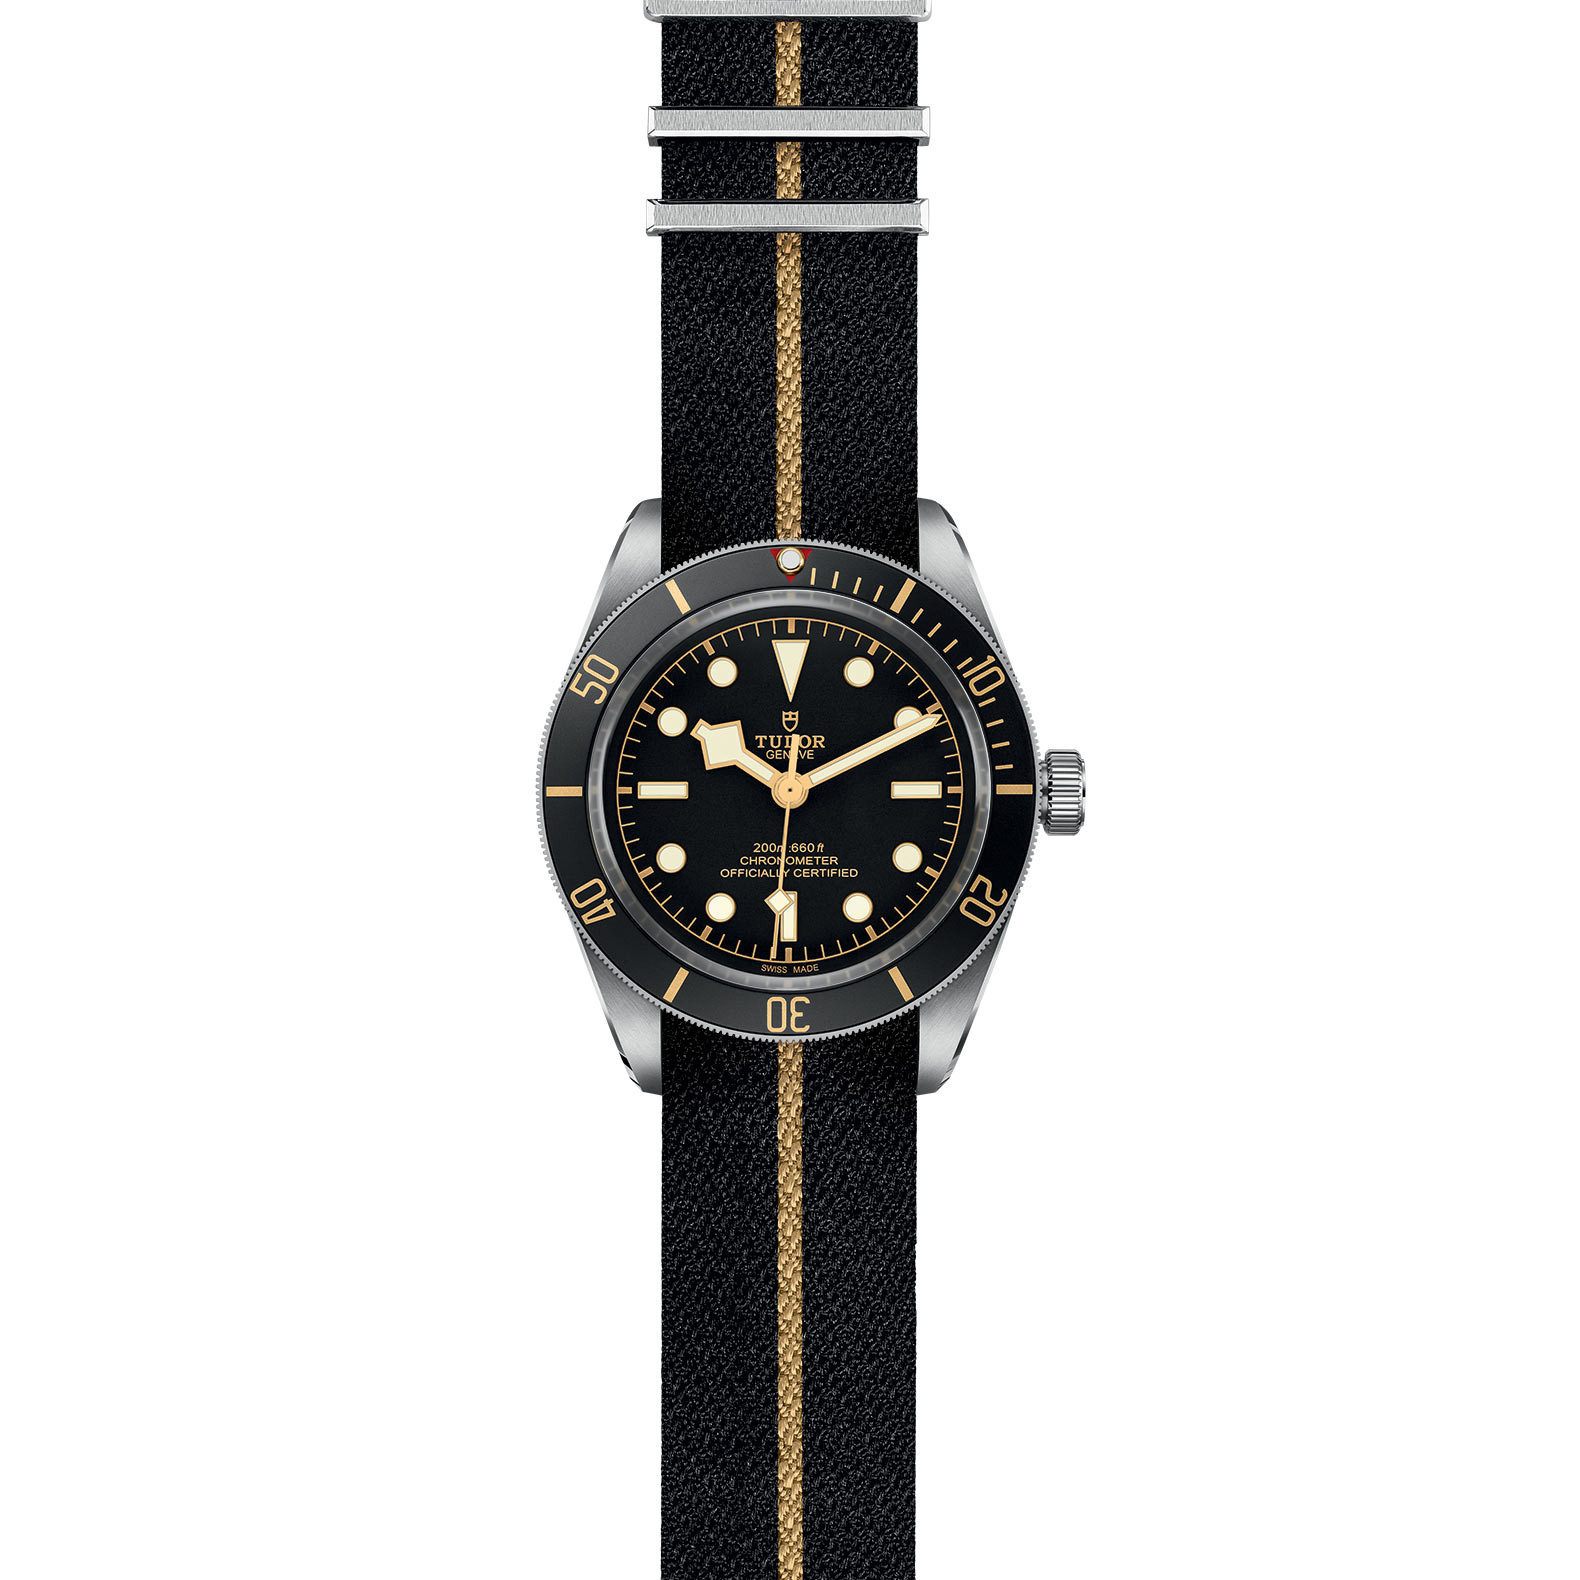 TUDOR Black Bay Fifty-Eight Watch Front Facing